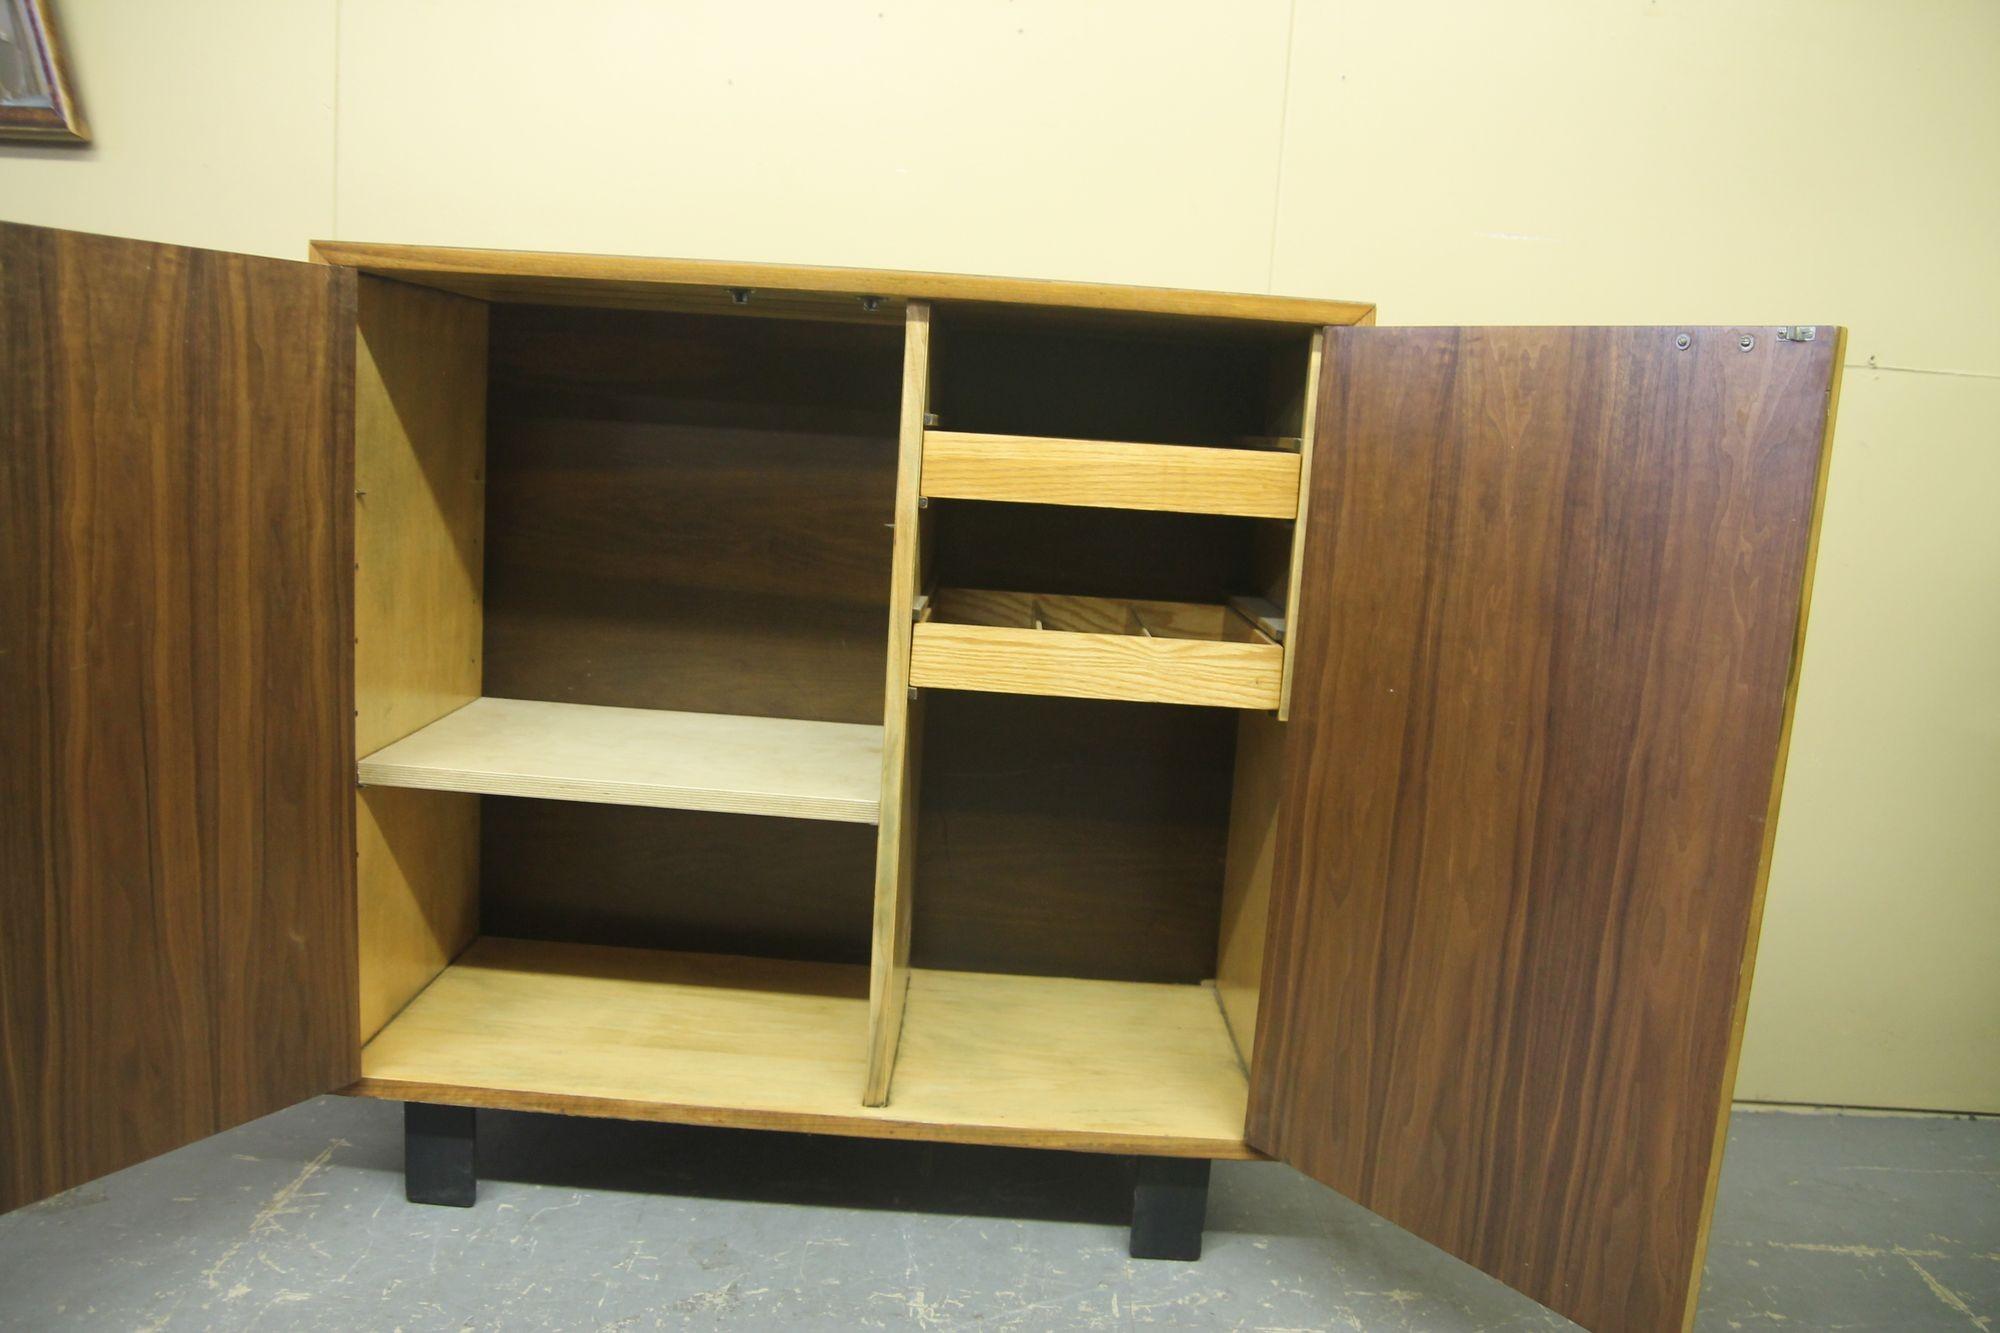 Rarely seen 2 door cabinet by George Nelson. Inside cabinet has two sliding draws on right side and a single replacement shelf on left side. There is room for more shelve if desired. Piece retains its original laminate top.